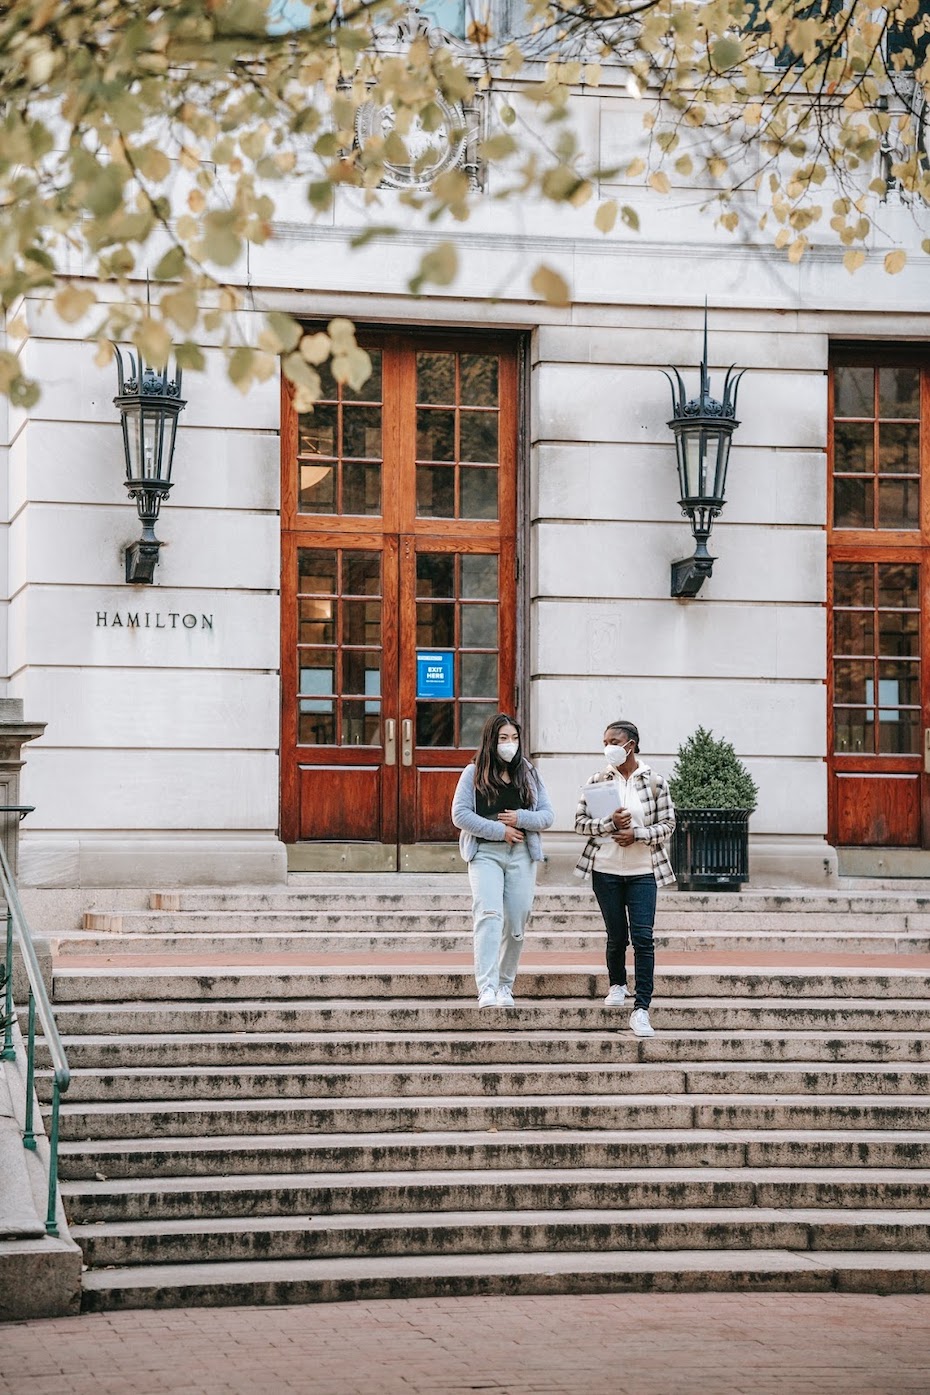 two students wearing masks walking down the steps in front of an academic institution during the COVID pandemic